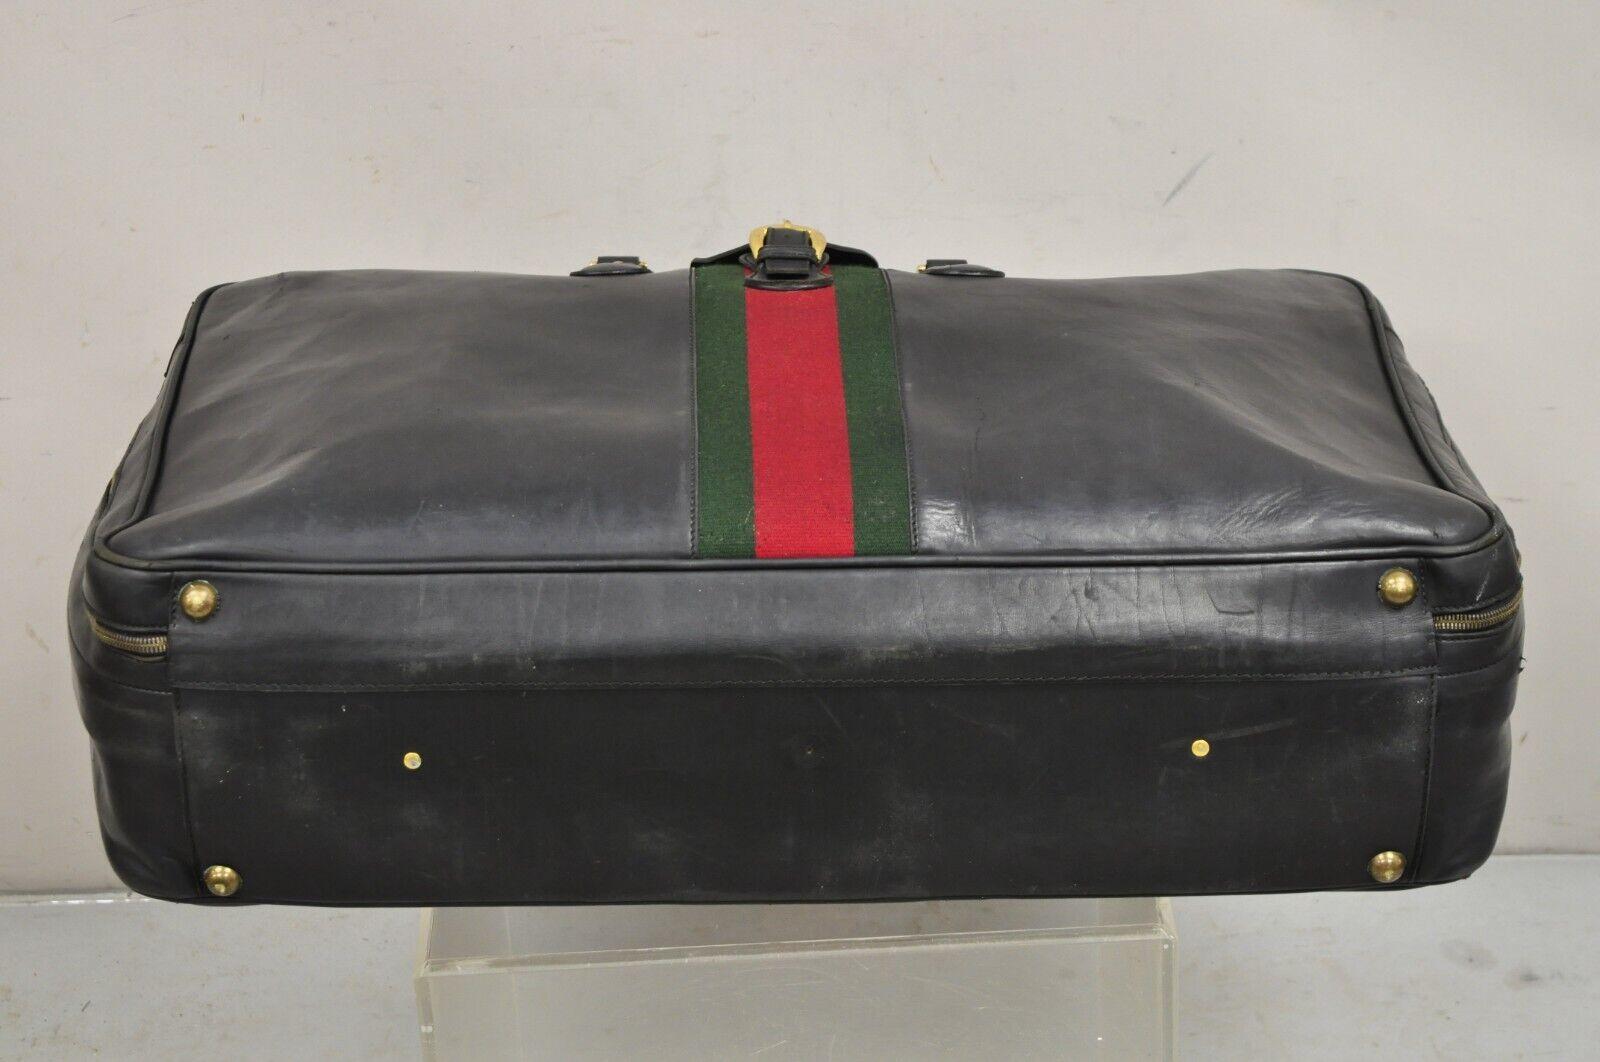 Vintage Gucci Large Black Leather Suitcase Luggage Travel Bag Green Red Webbing For Sale 5